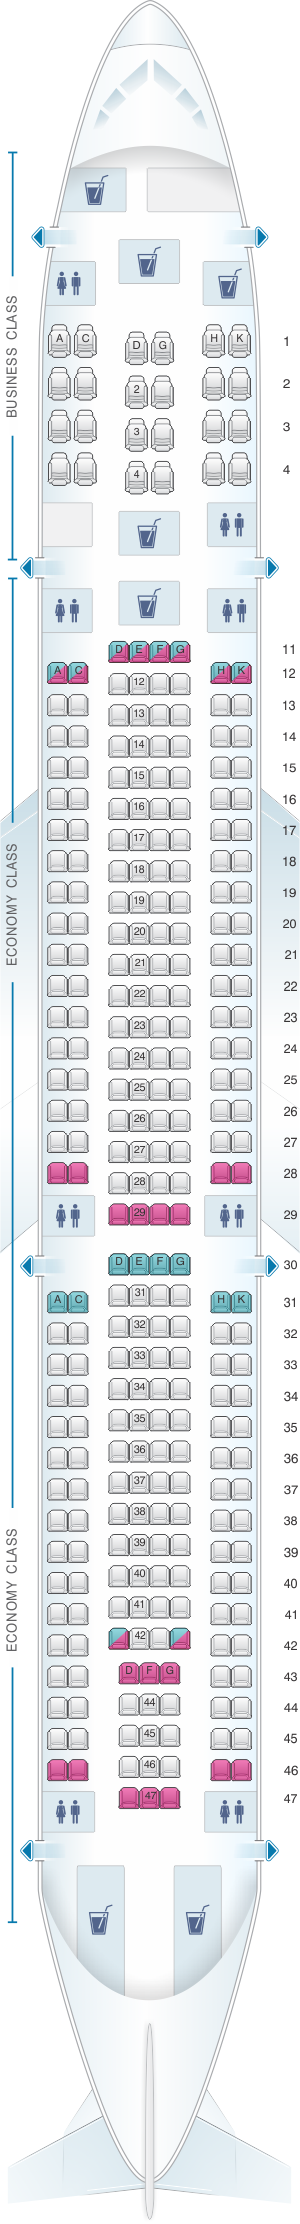 Seat map for Hi Fly Airbus A340 300 SUN 295pax